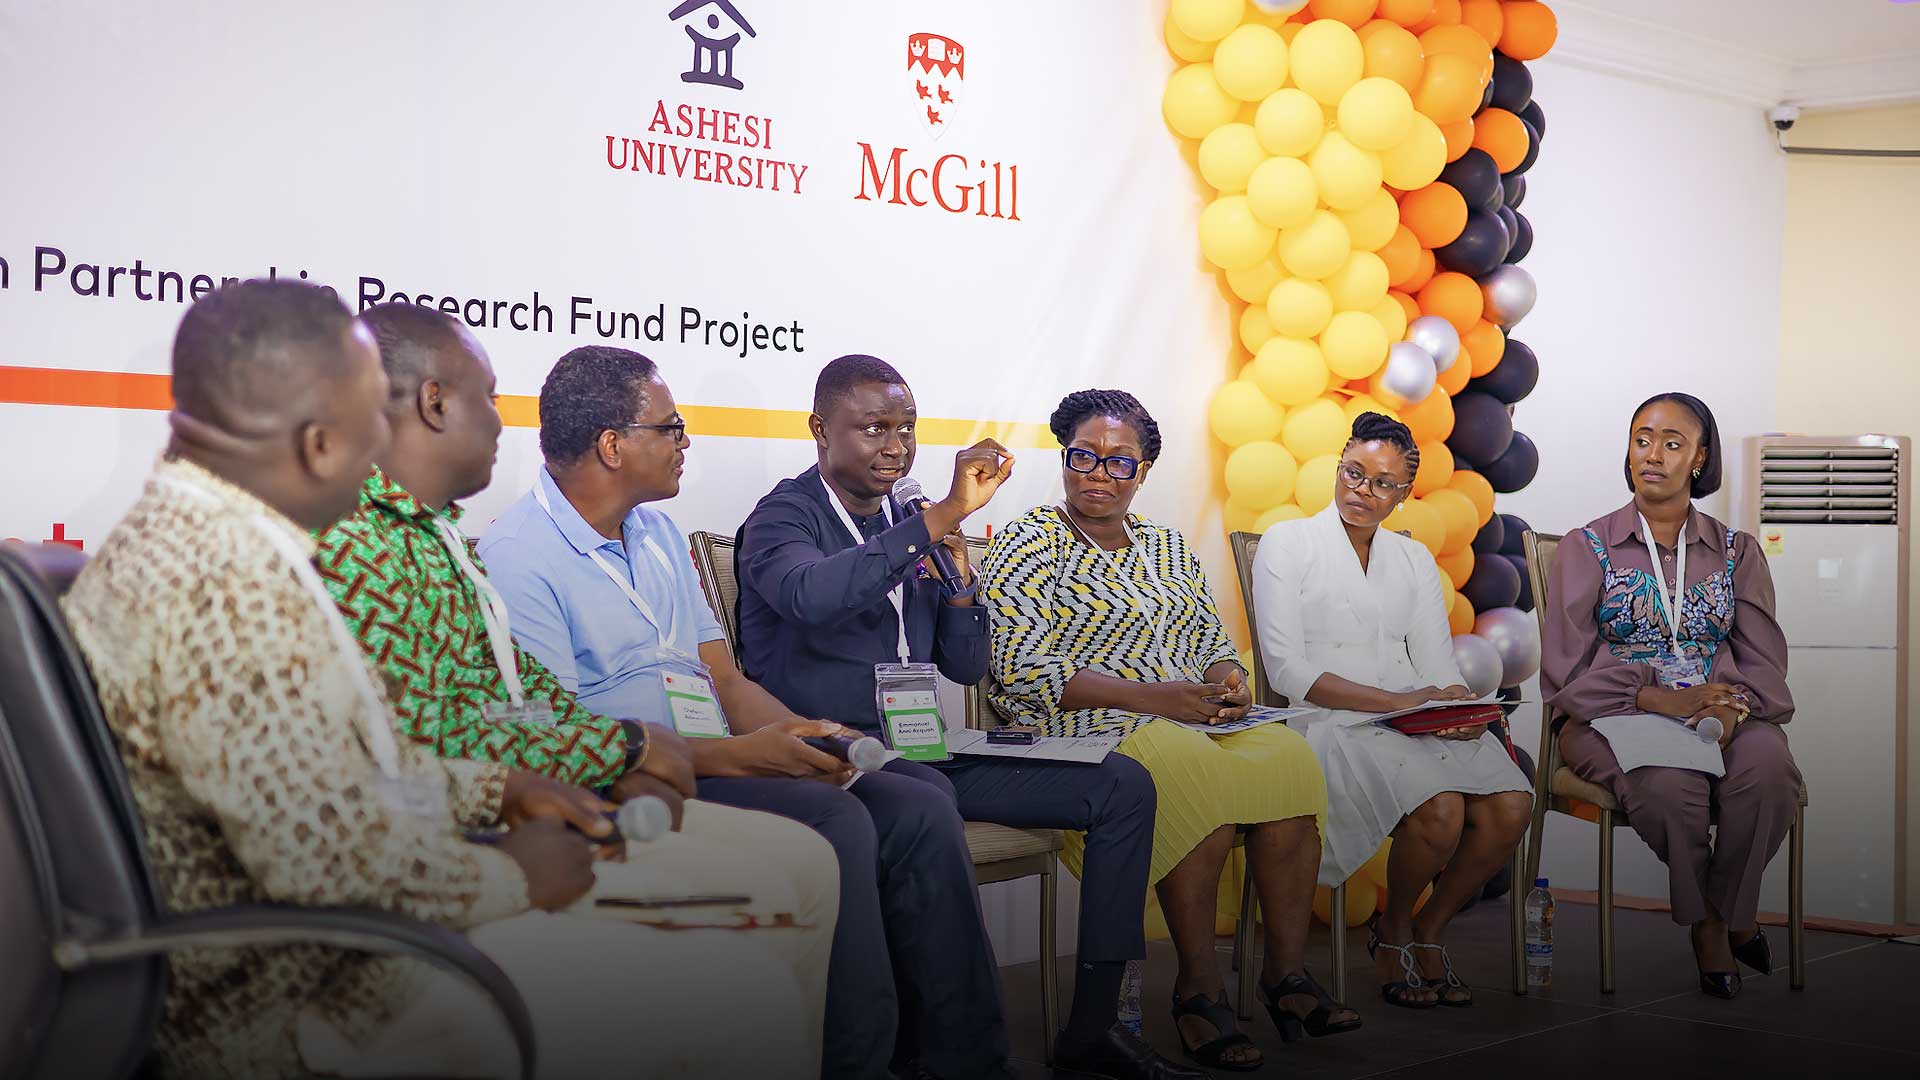 Ashesi and McGill faculty share initial findings on enabling young entrepreneurs